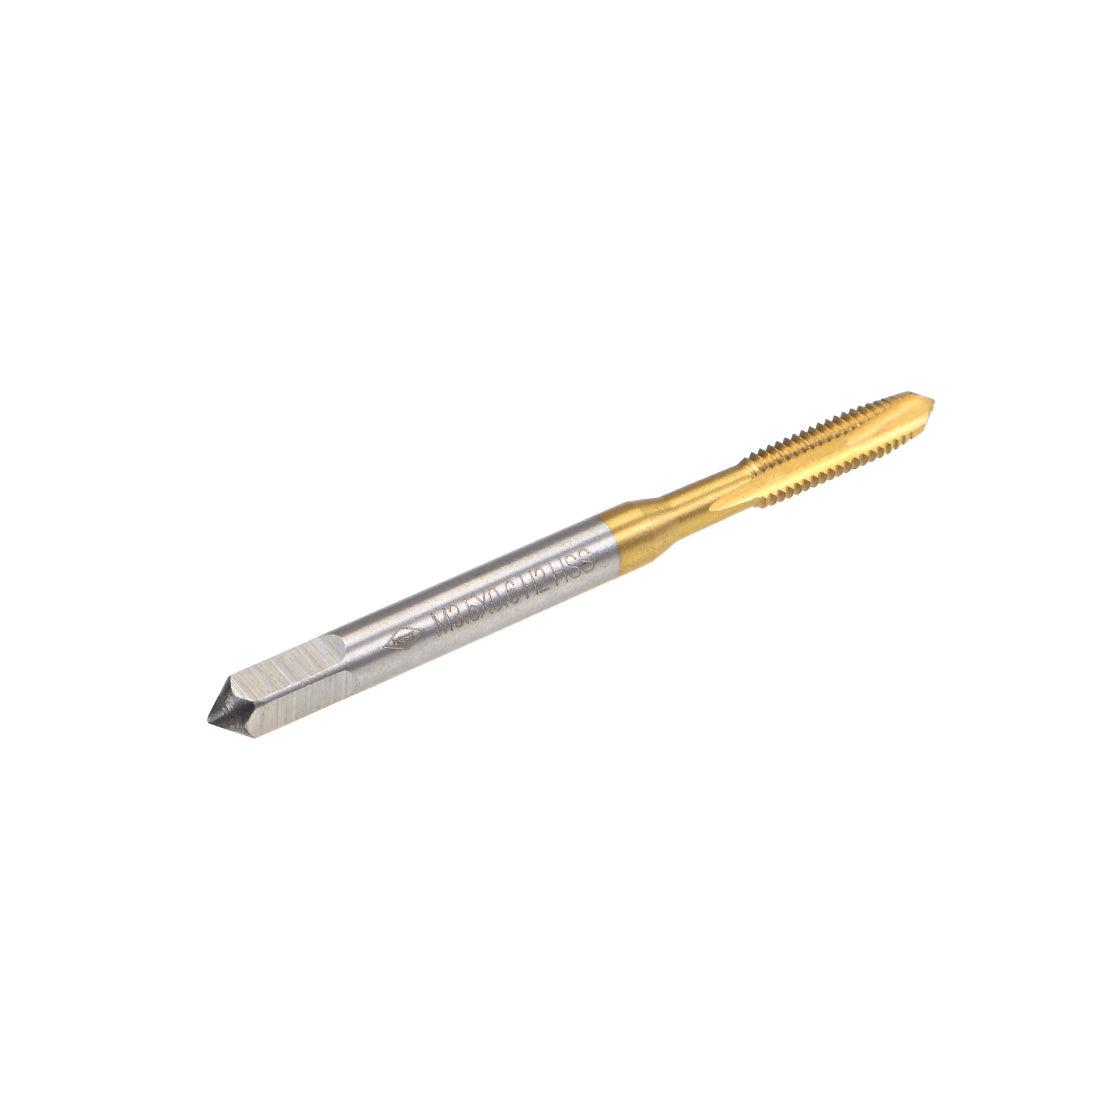 uxcell Uxcell Spiral Point Threading Tap M3.5 Thread 0.6 Pitch Titanium Coated HSS